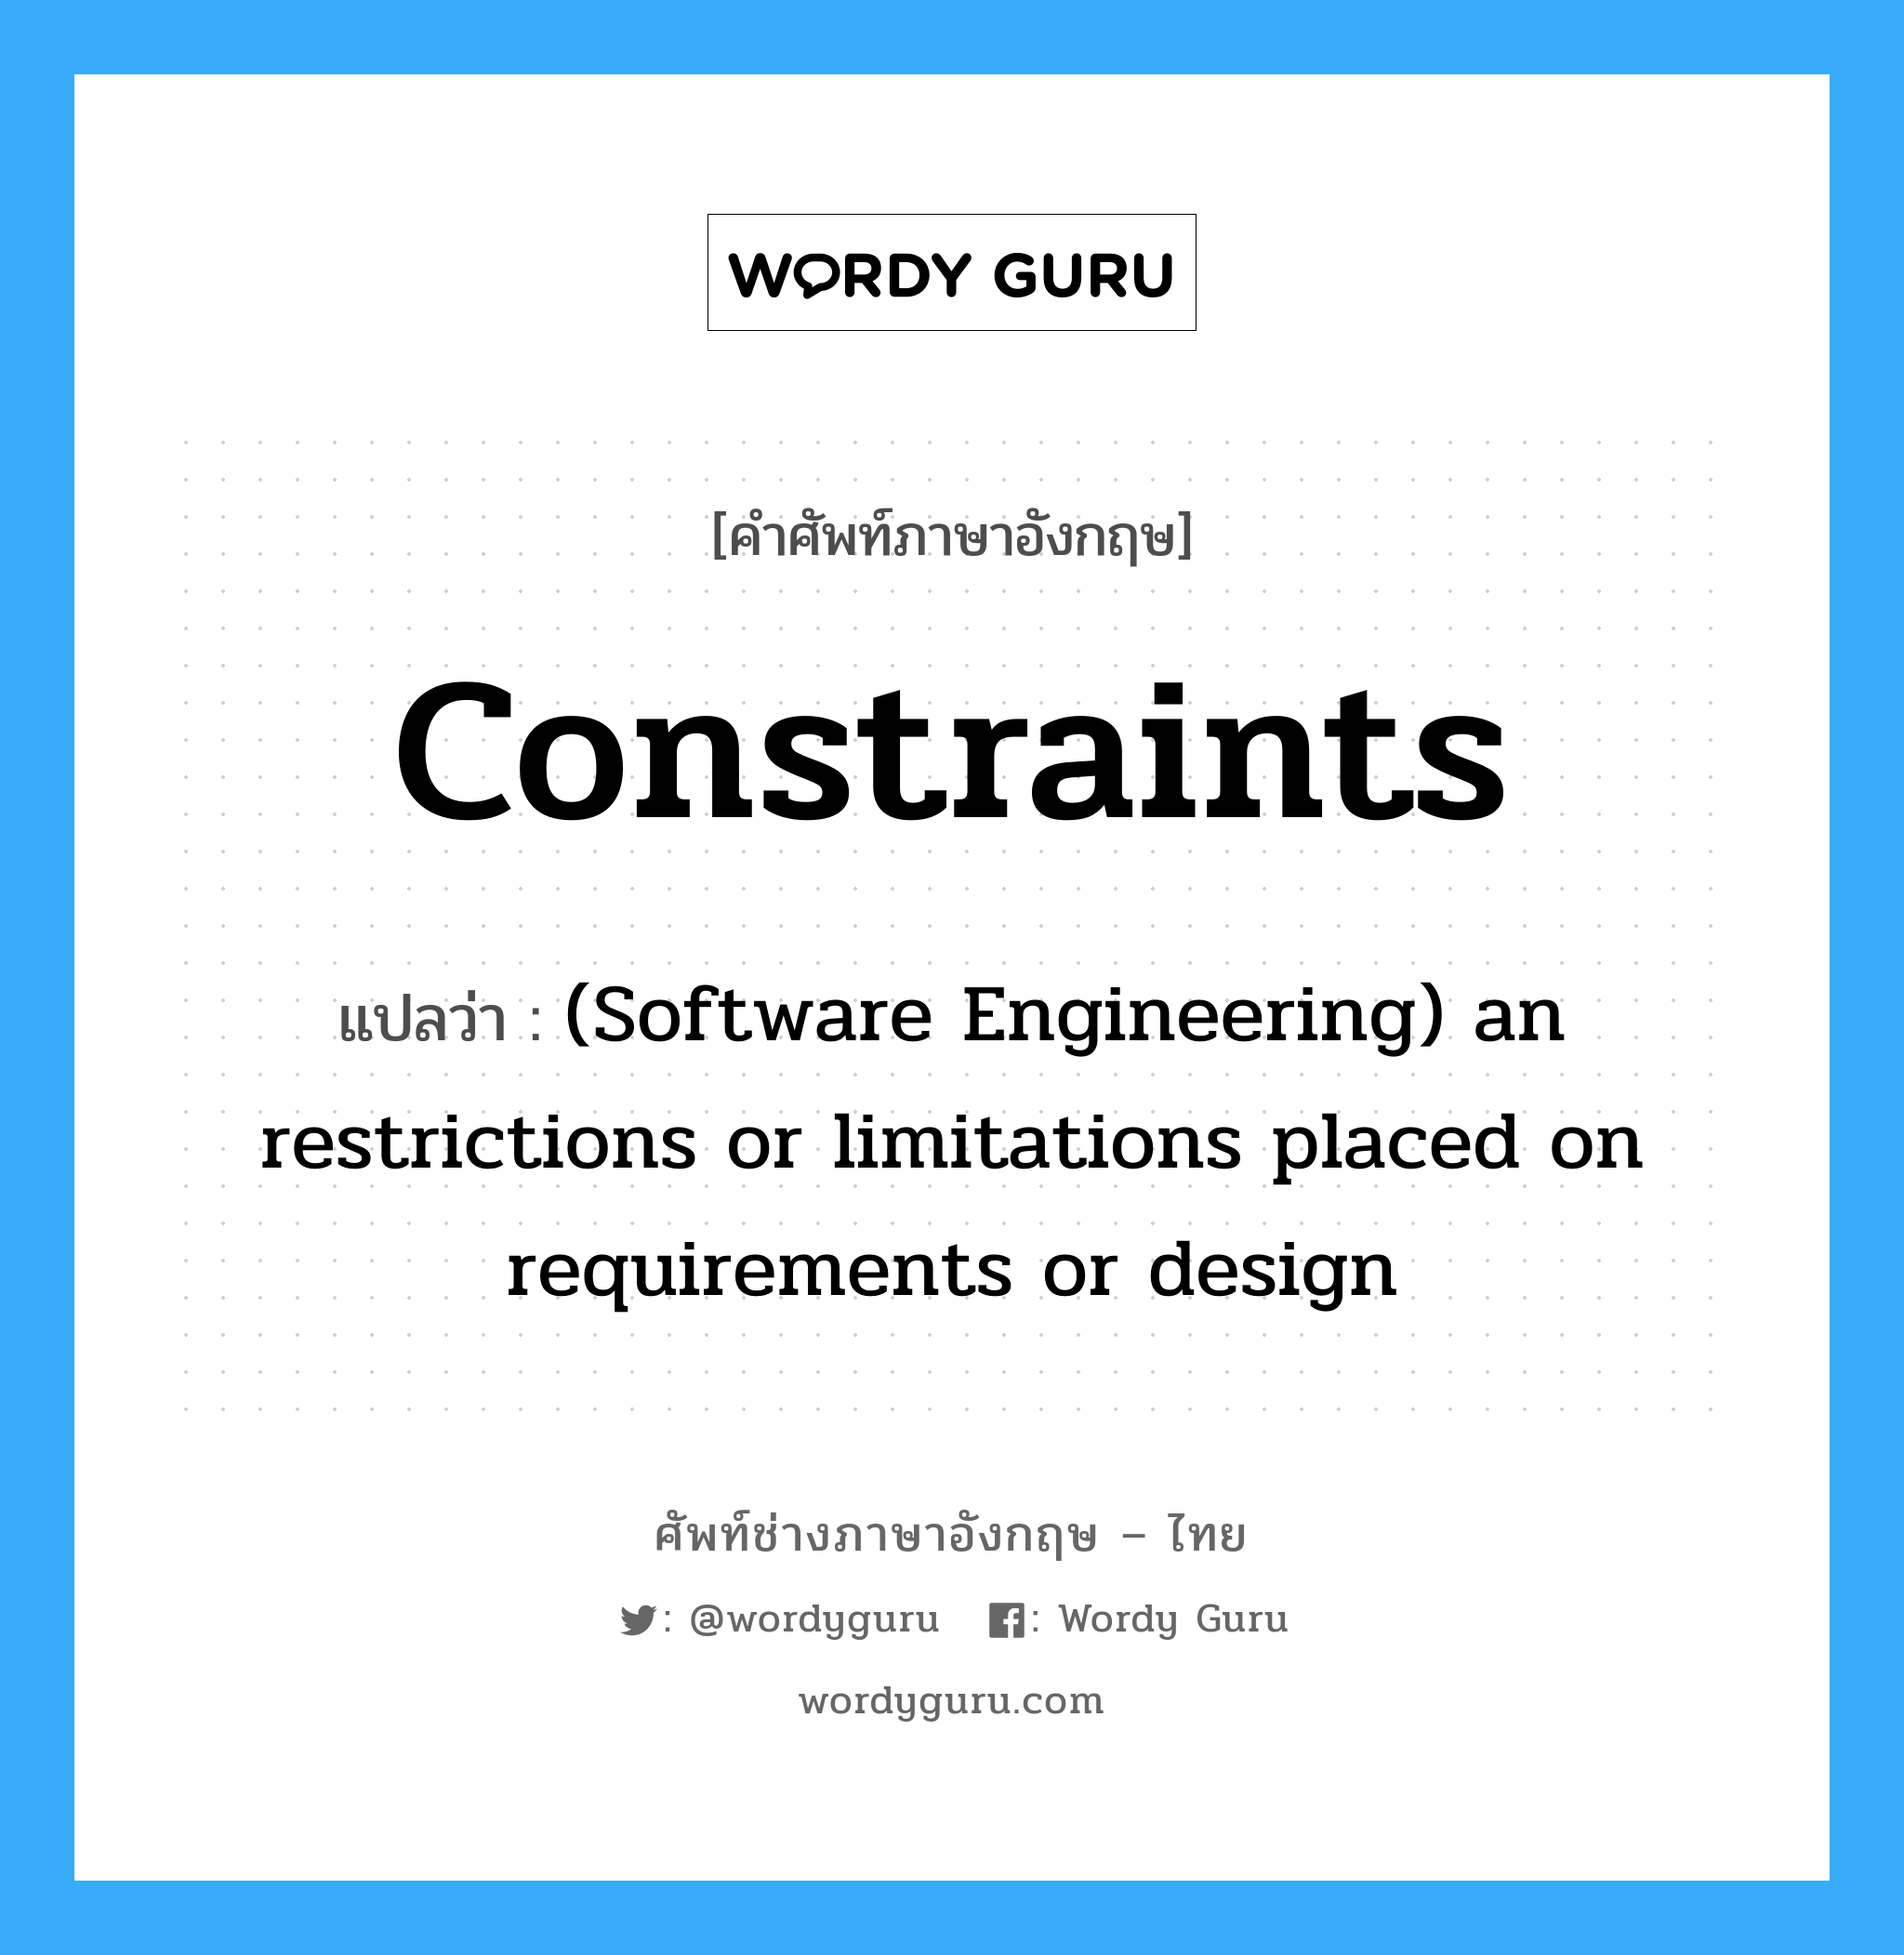 Constraints แปลว่า?, คำศัพท์ช่างภาษาอังกฤษ - ไทย Constraints คำศัพท์ภาษาอังกฤษ Constraints แปลว่า (Software Engineering) an restrictions or limitations placed on requirements or design